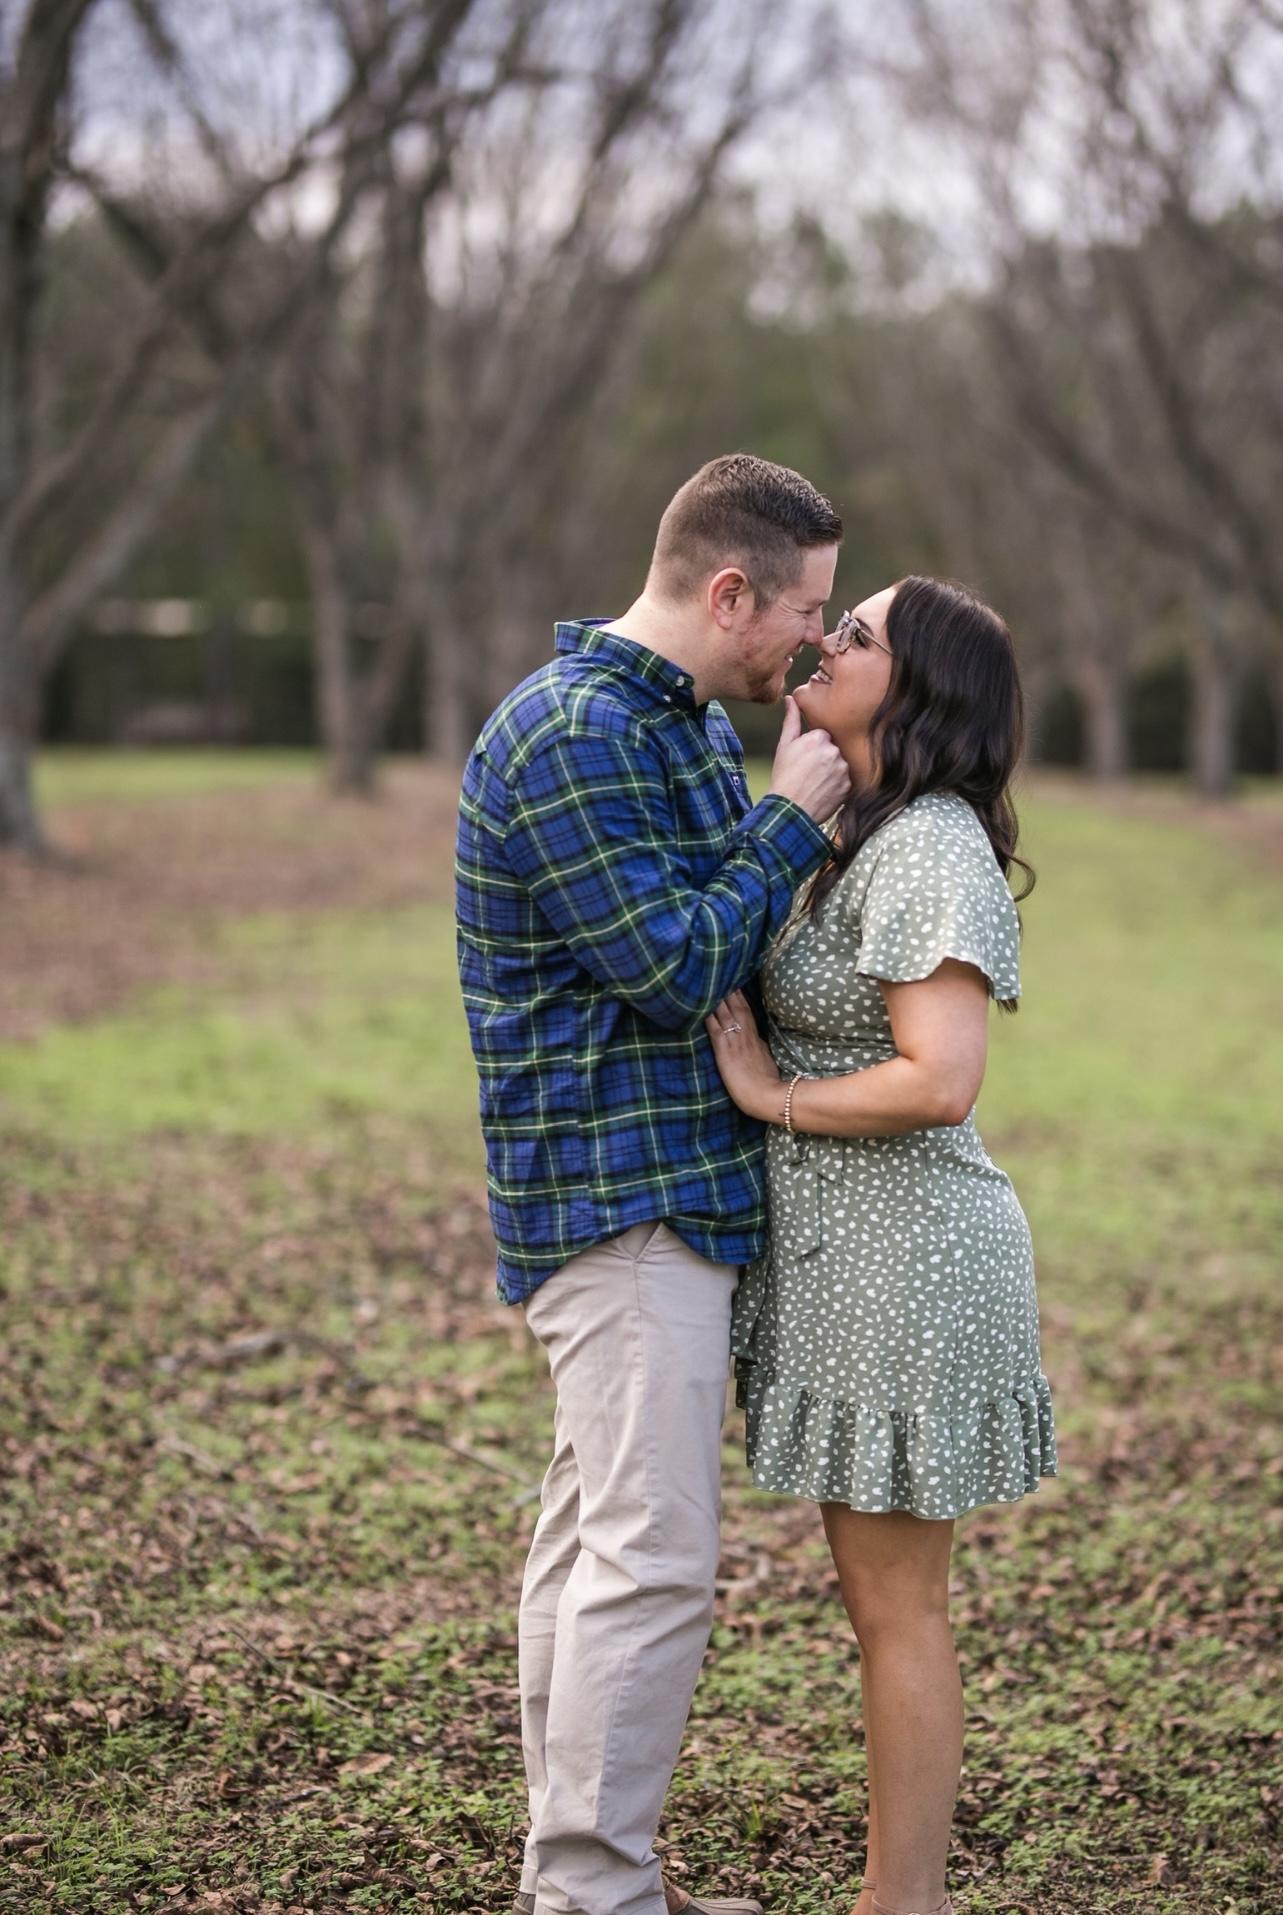 The Wedding Website of Ginna Chaney and Jordan Sparks